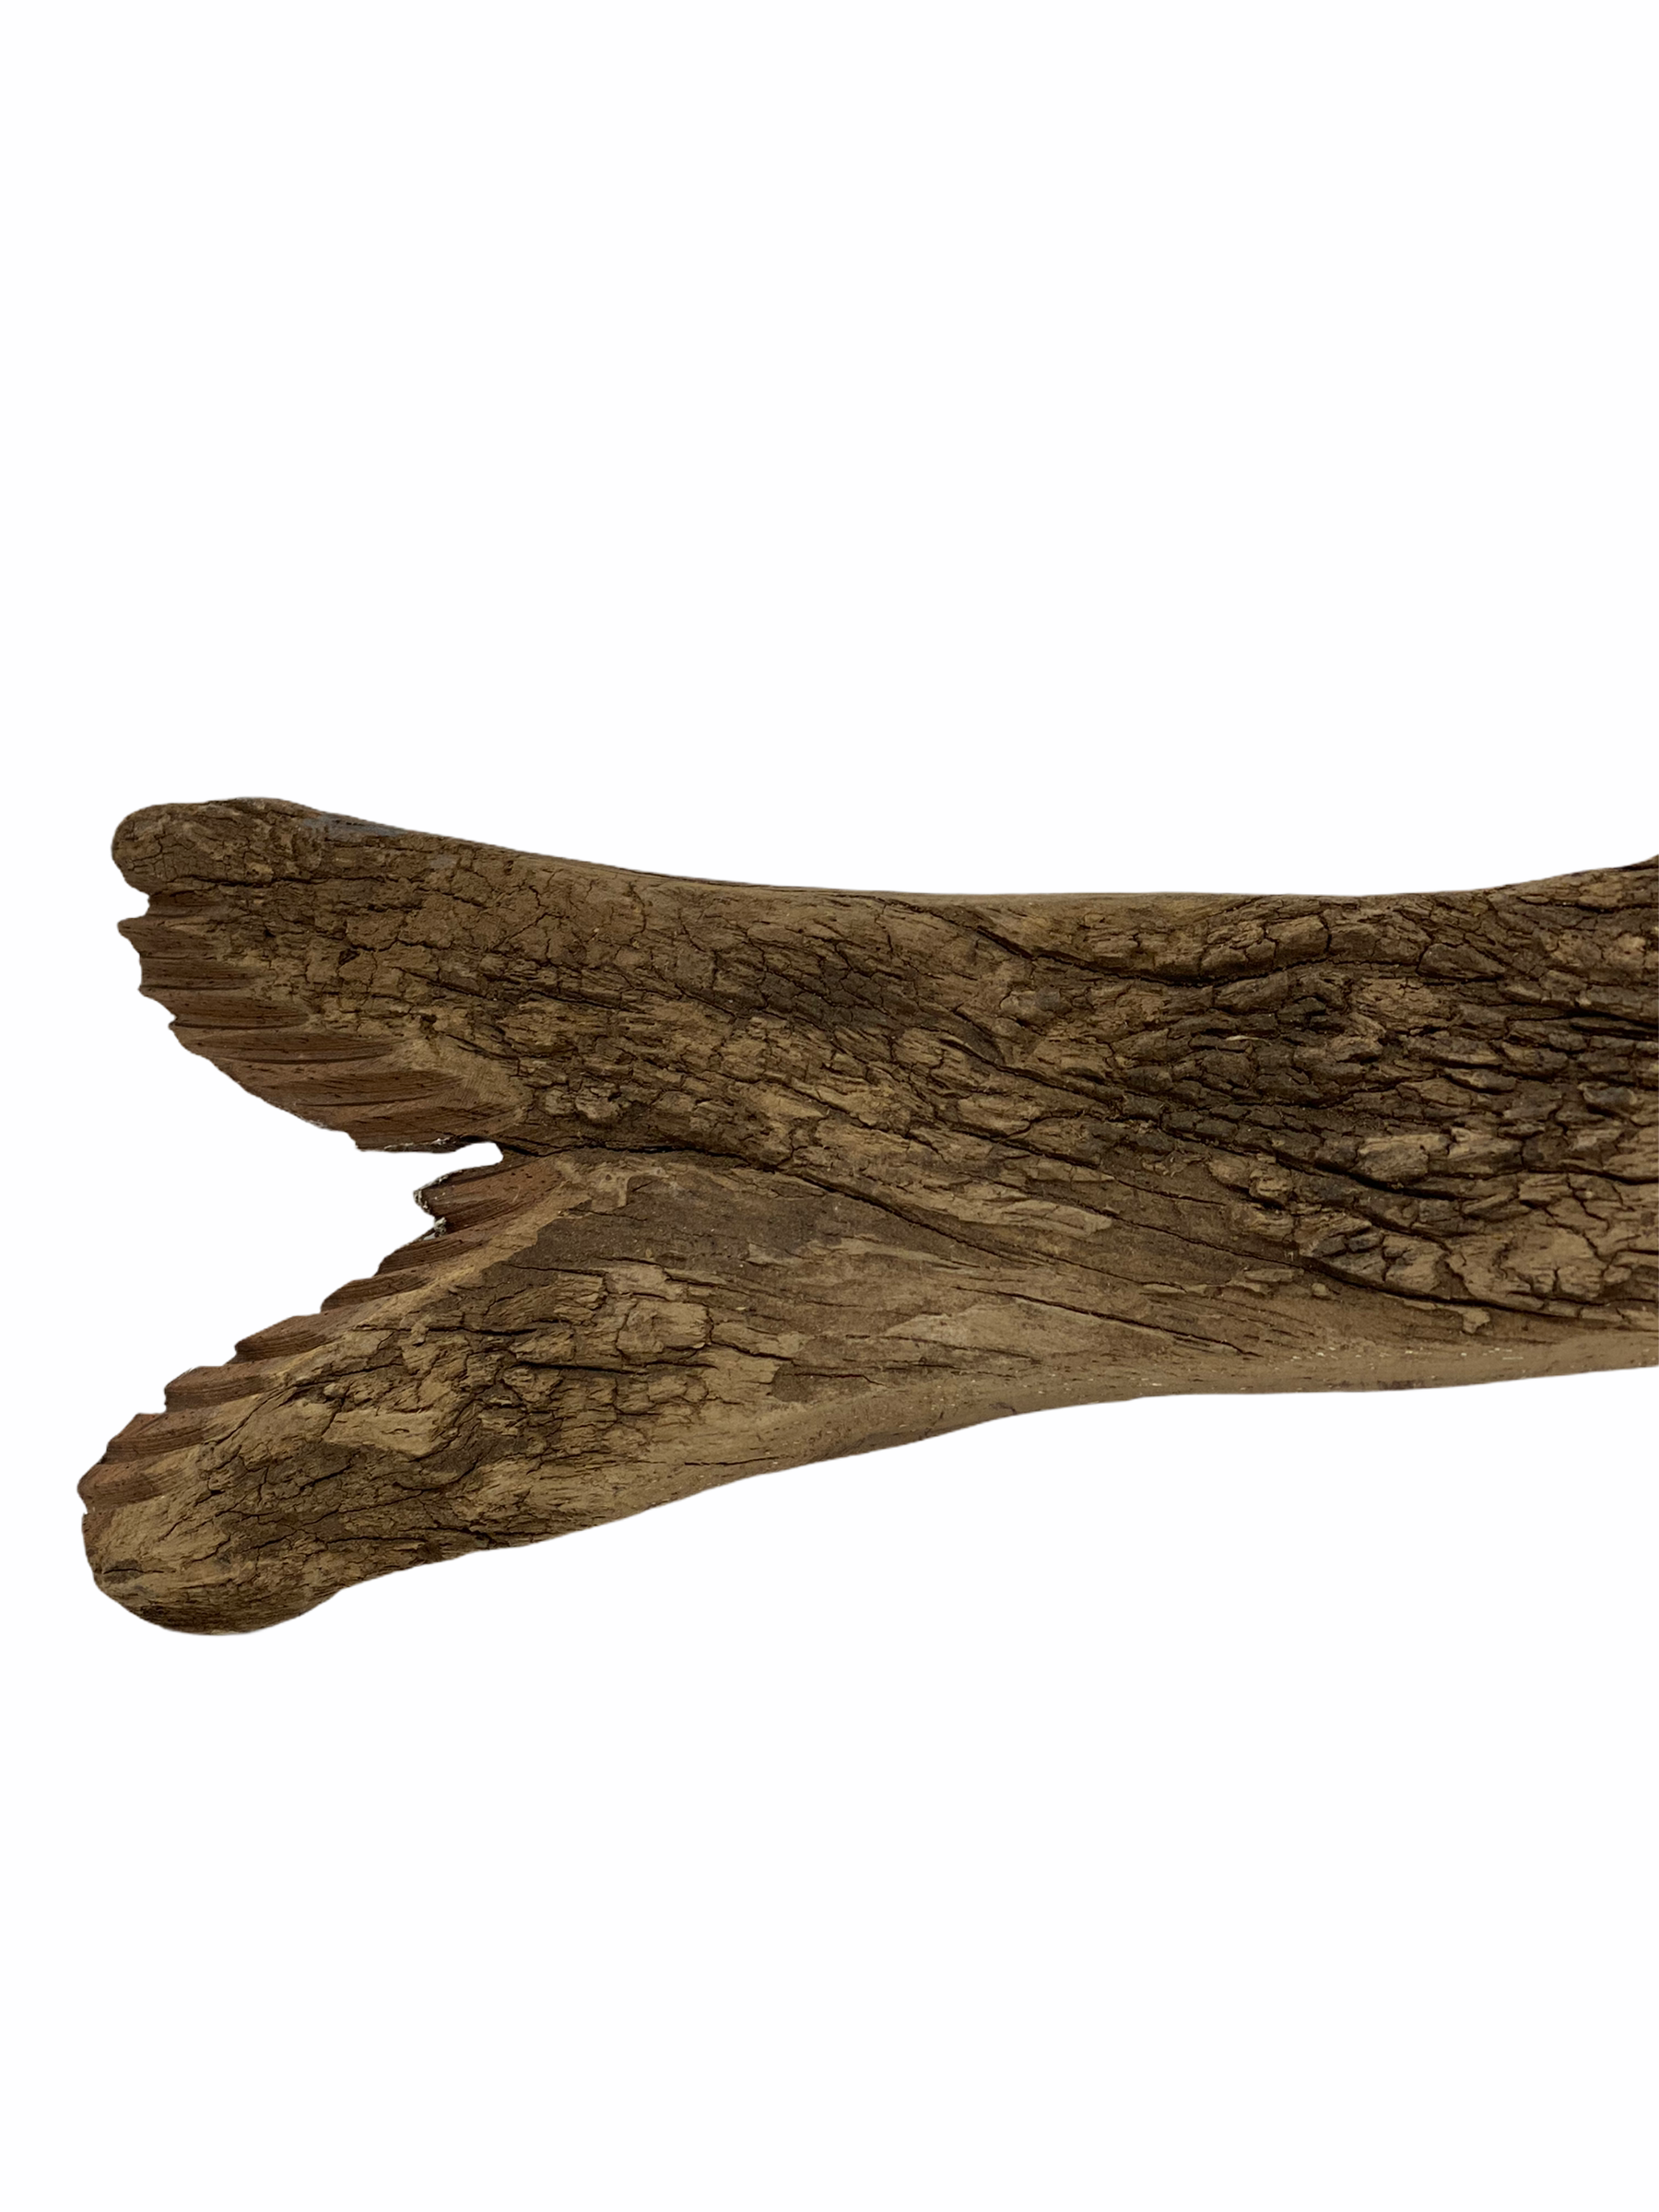 Driftwood Hand Carved Fish - Large